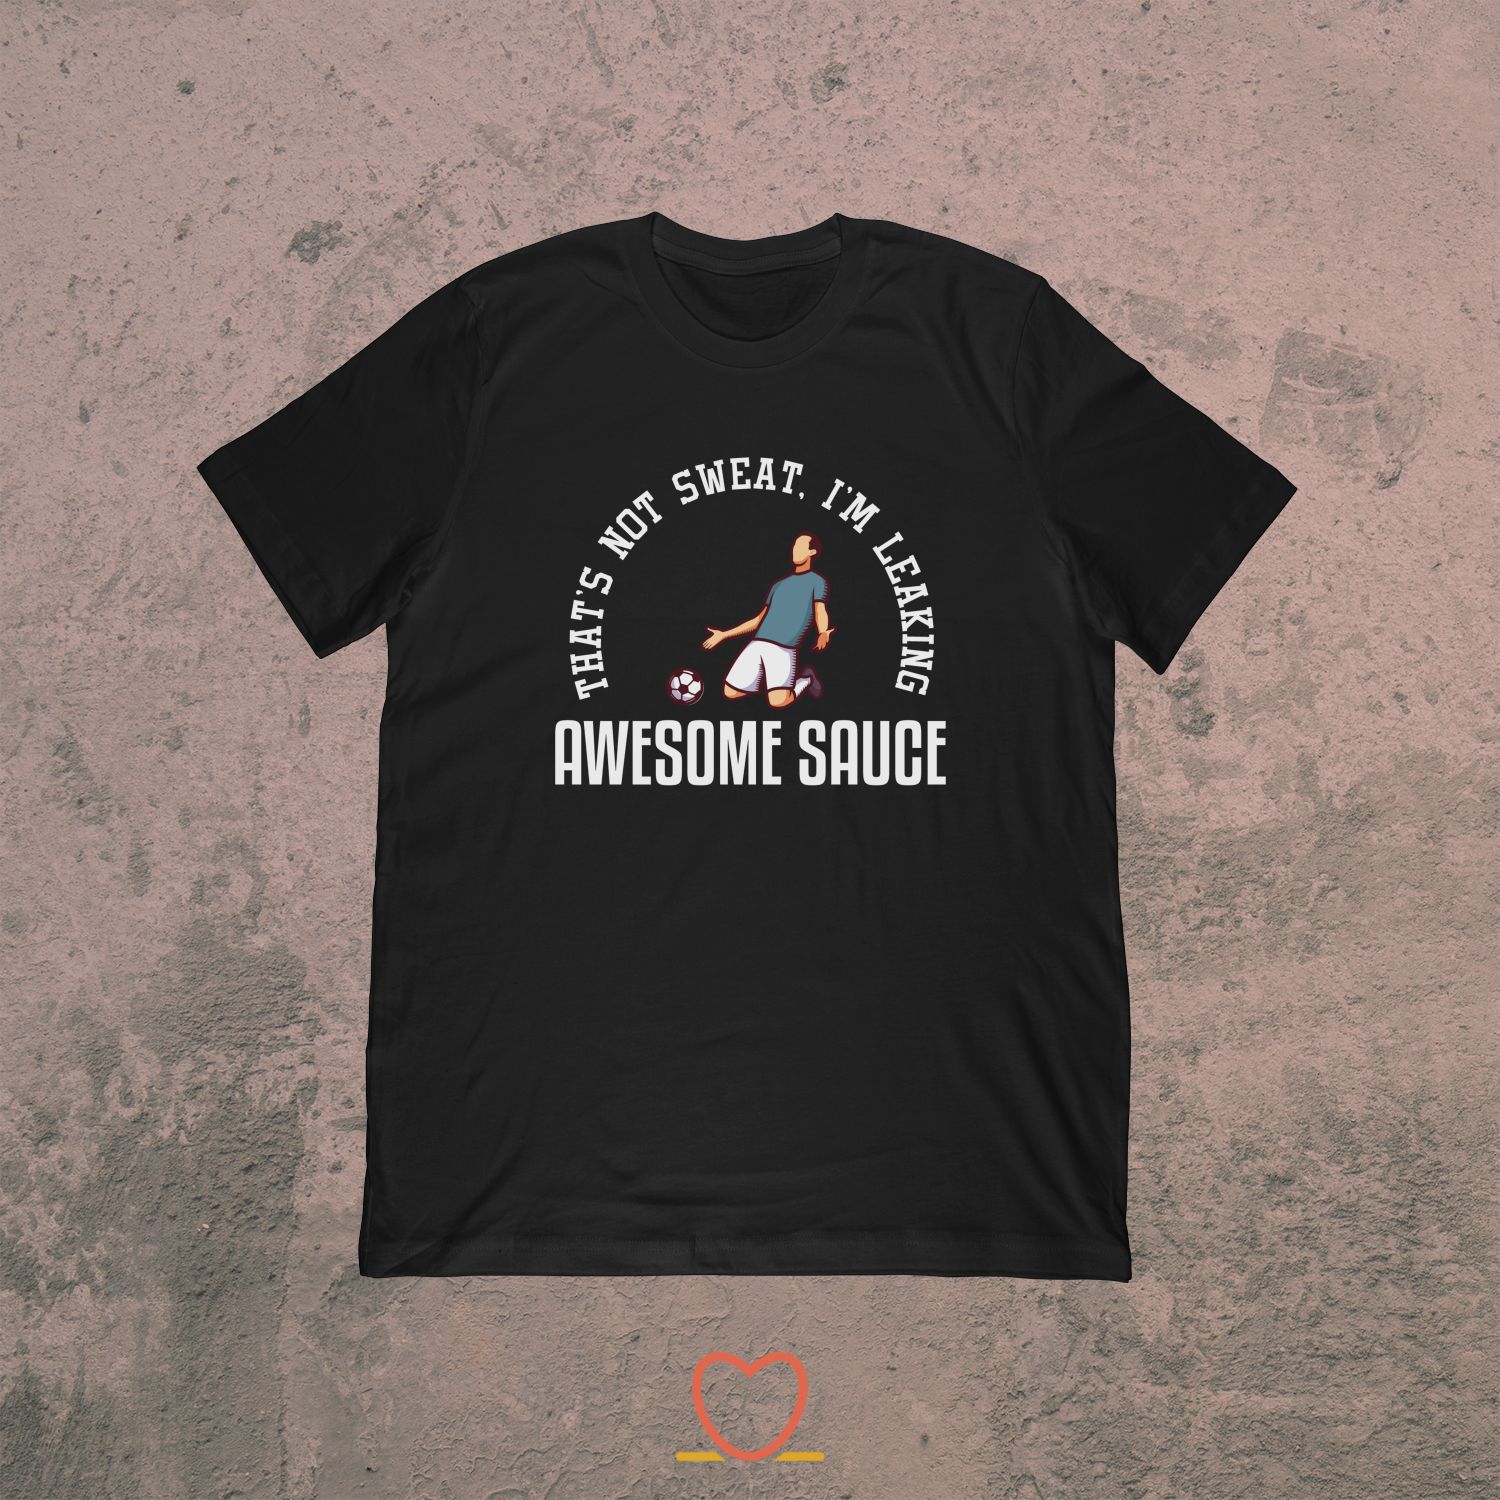 That’s Not Sweat I’m Leaking Awesome Sauce – Training Camp Tee